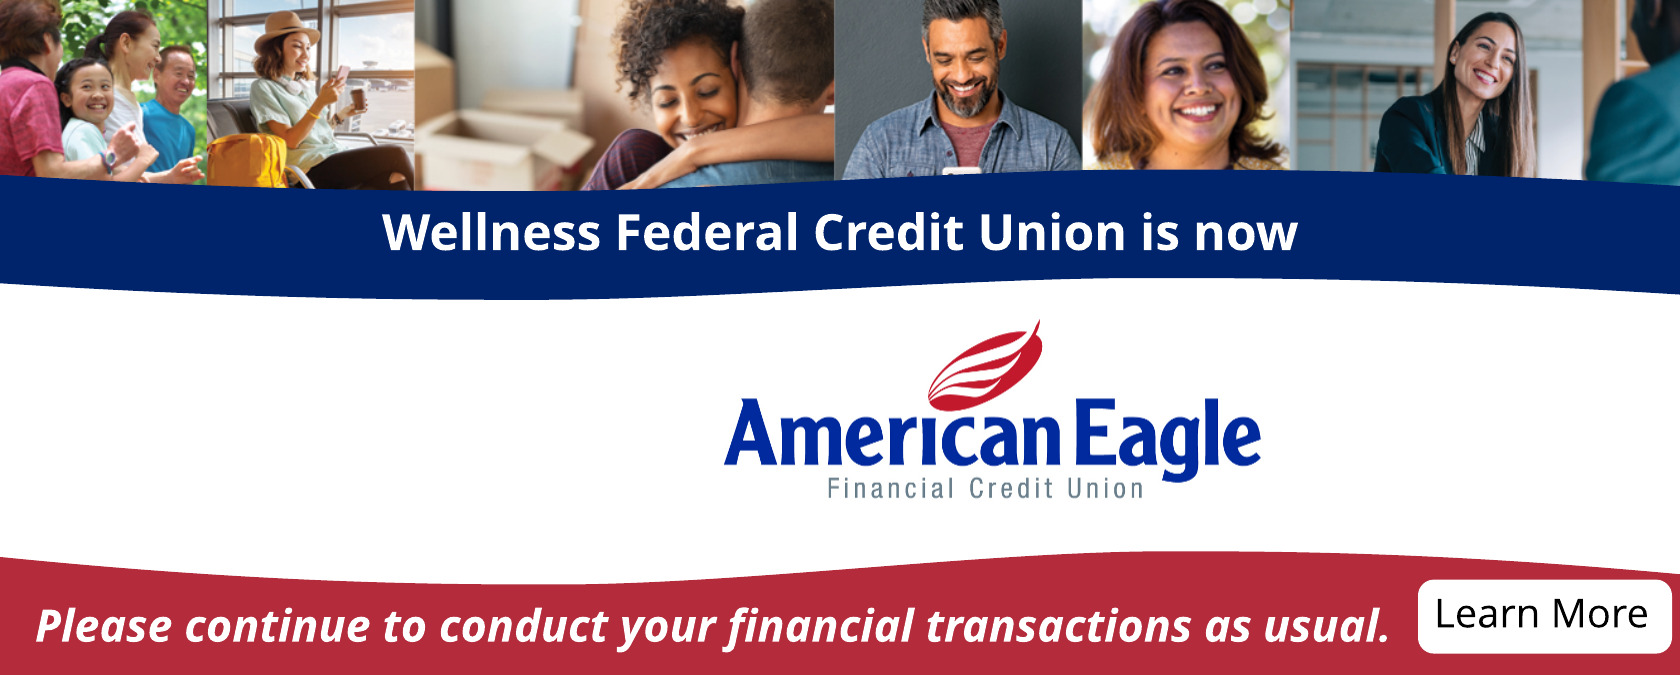 Wellness FCU is now American Eagle FCU. Please continue to conduct your financial transactions as usual. More information to follow.